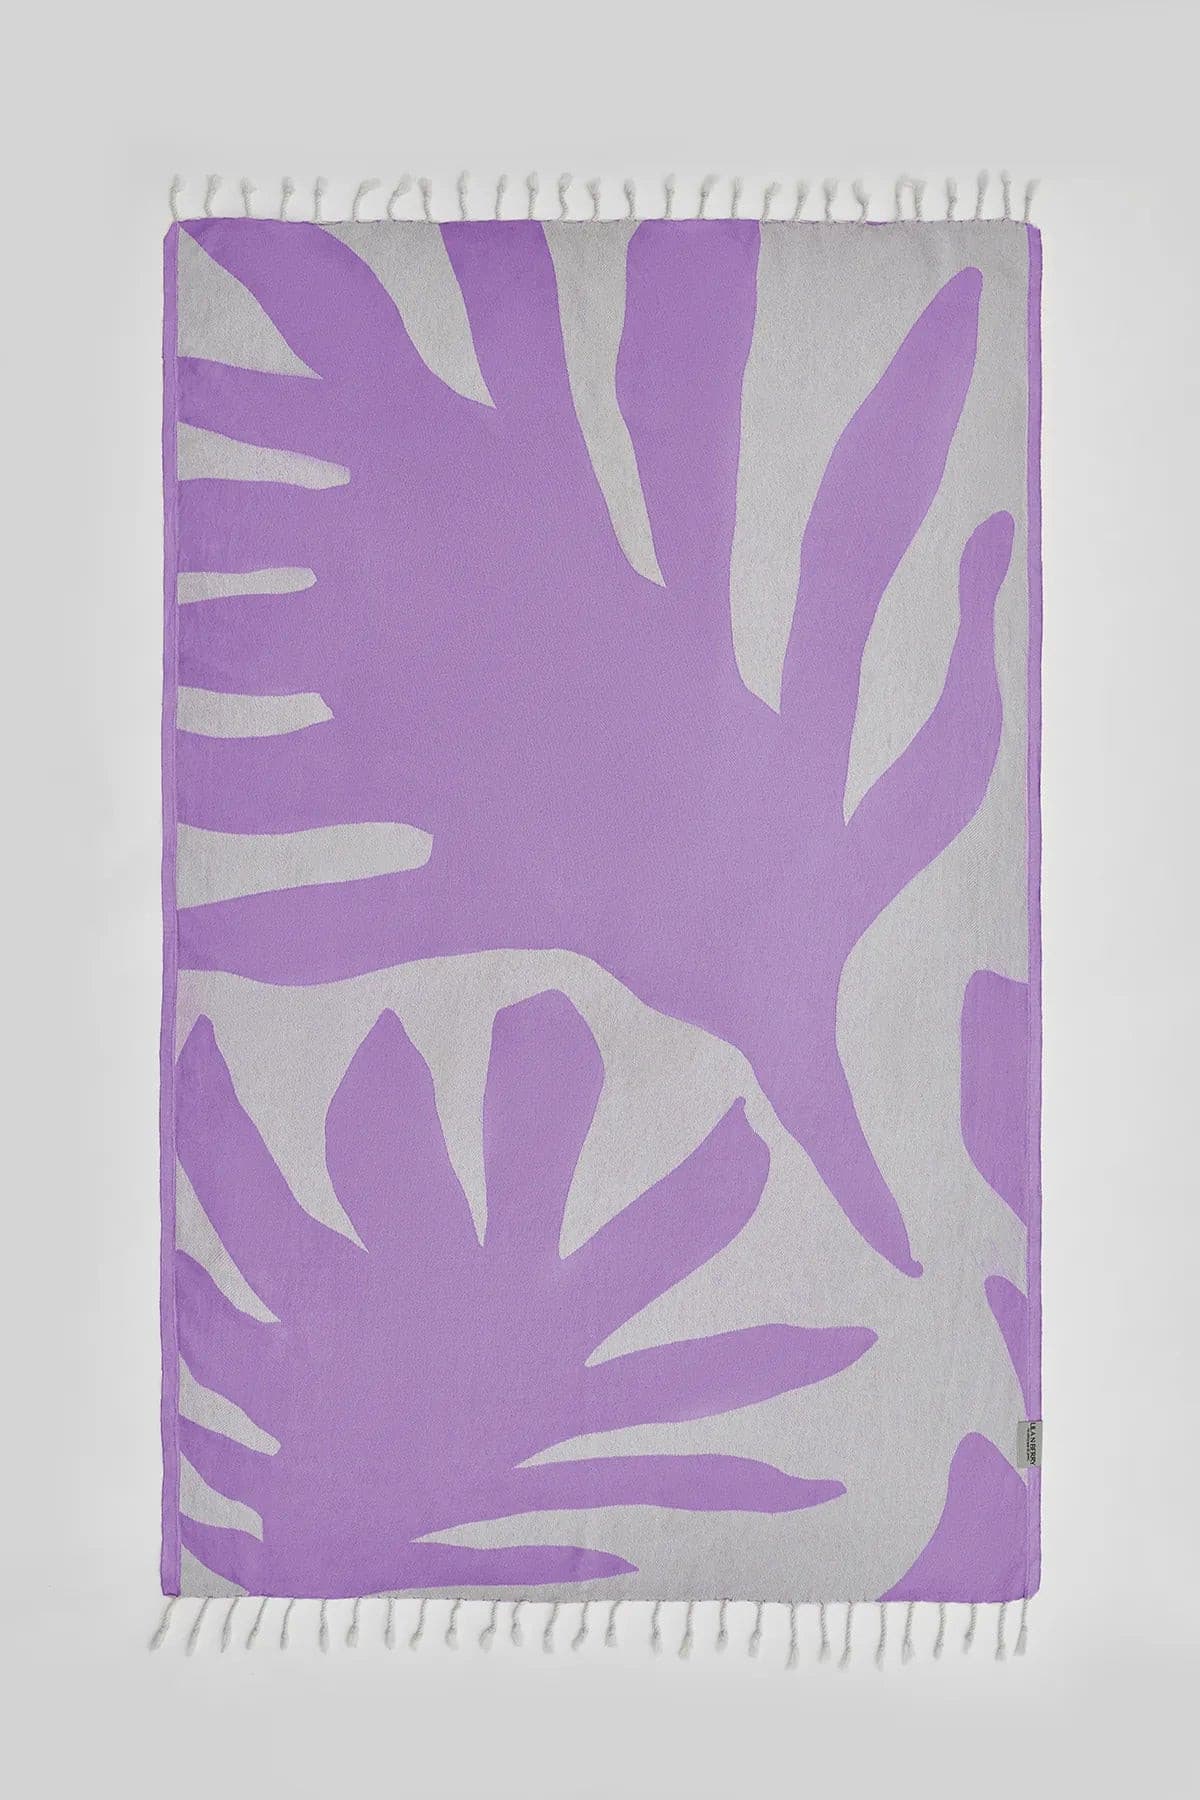 Beach/Bath,living place,Lilac,Turkish towel,Front side,summer,line patterned,double-faces,purified sand,light,compact, easy pack,fun, recycled,fun,double color,diamond,eastern flare,breeze,tropical forest